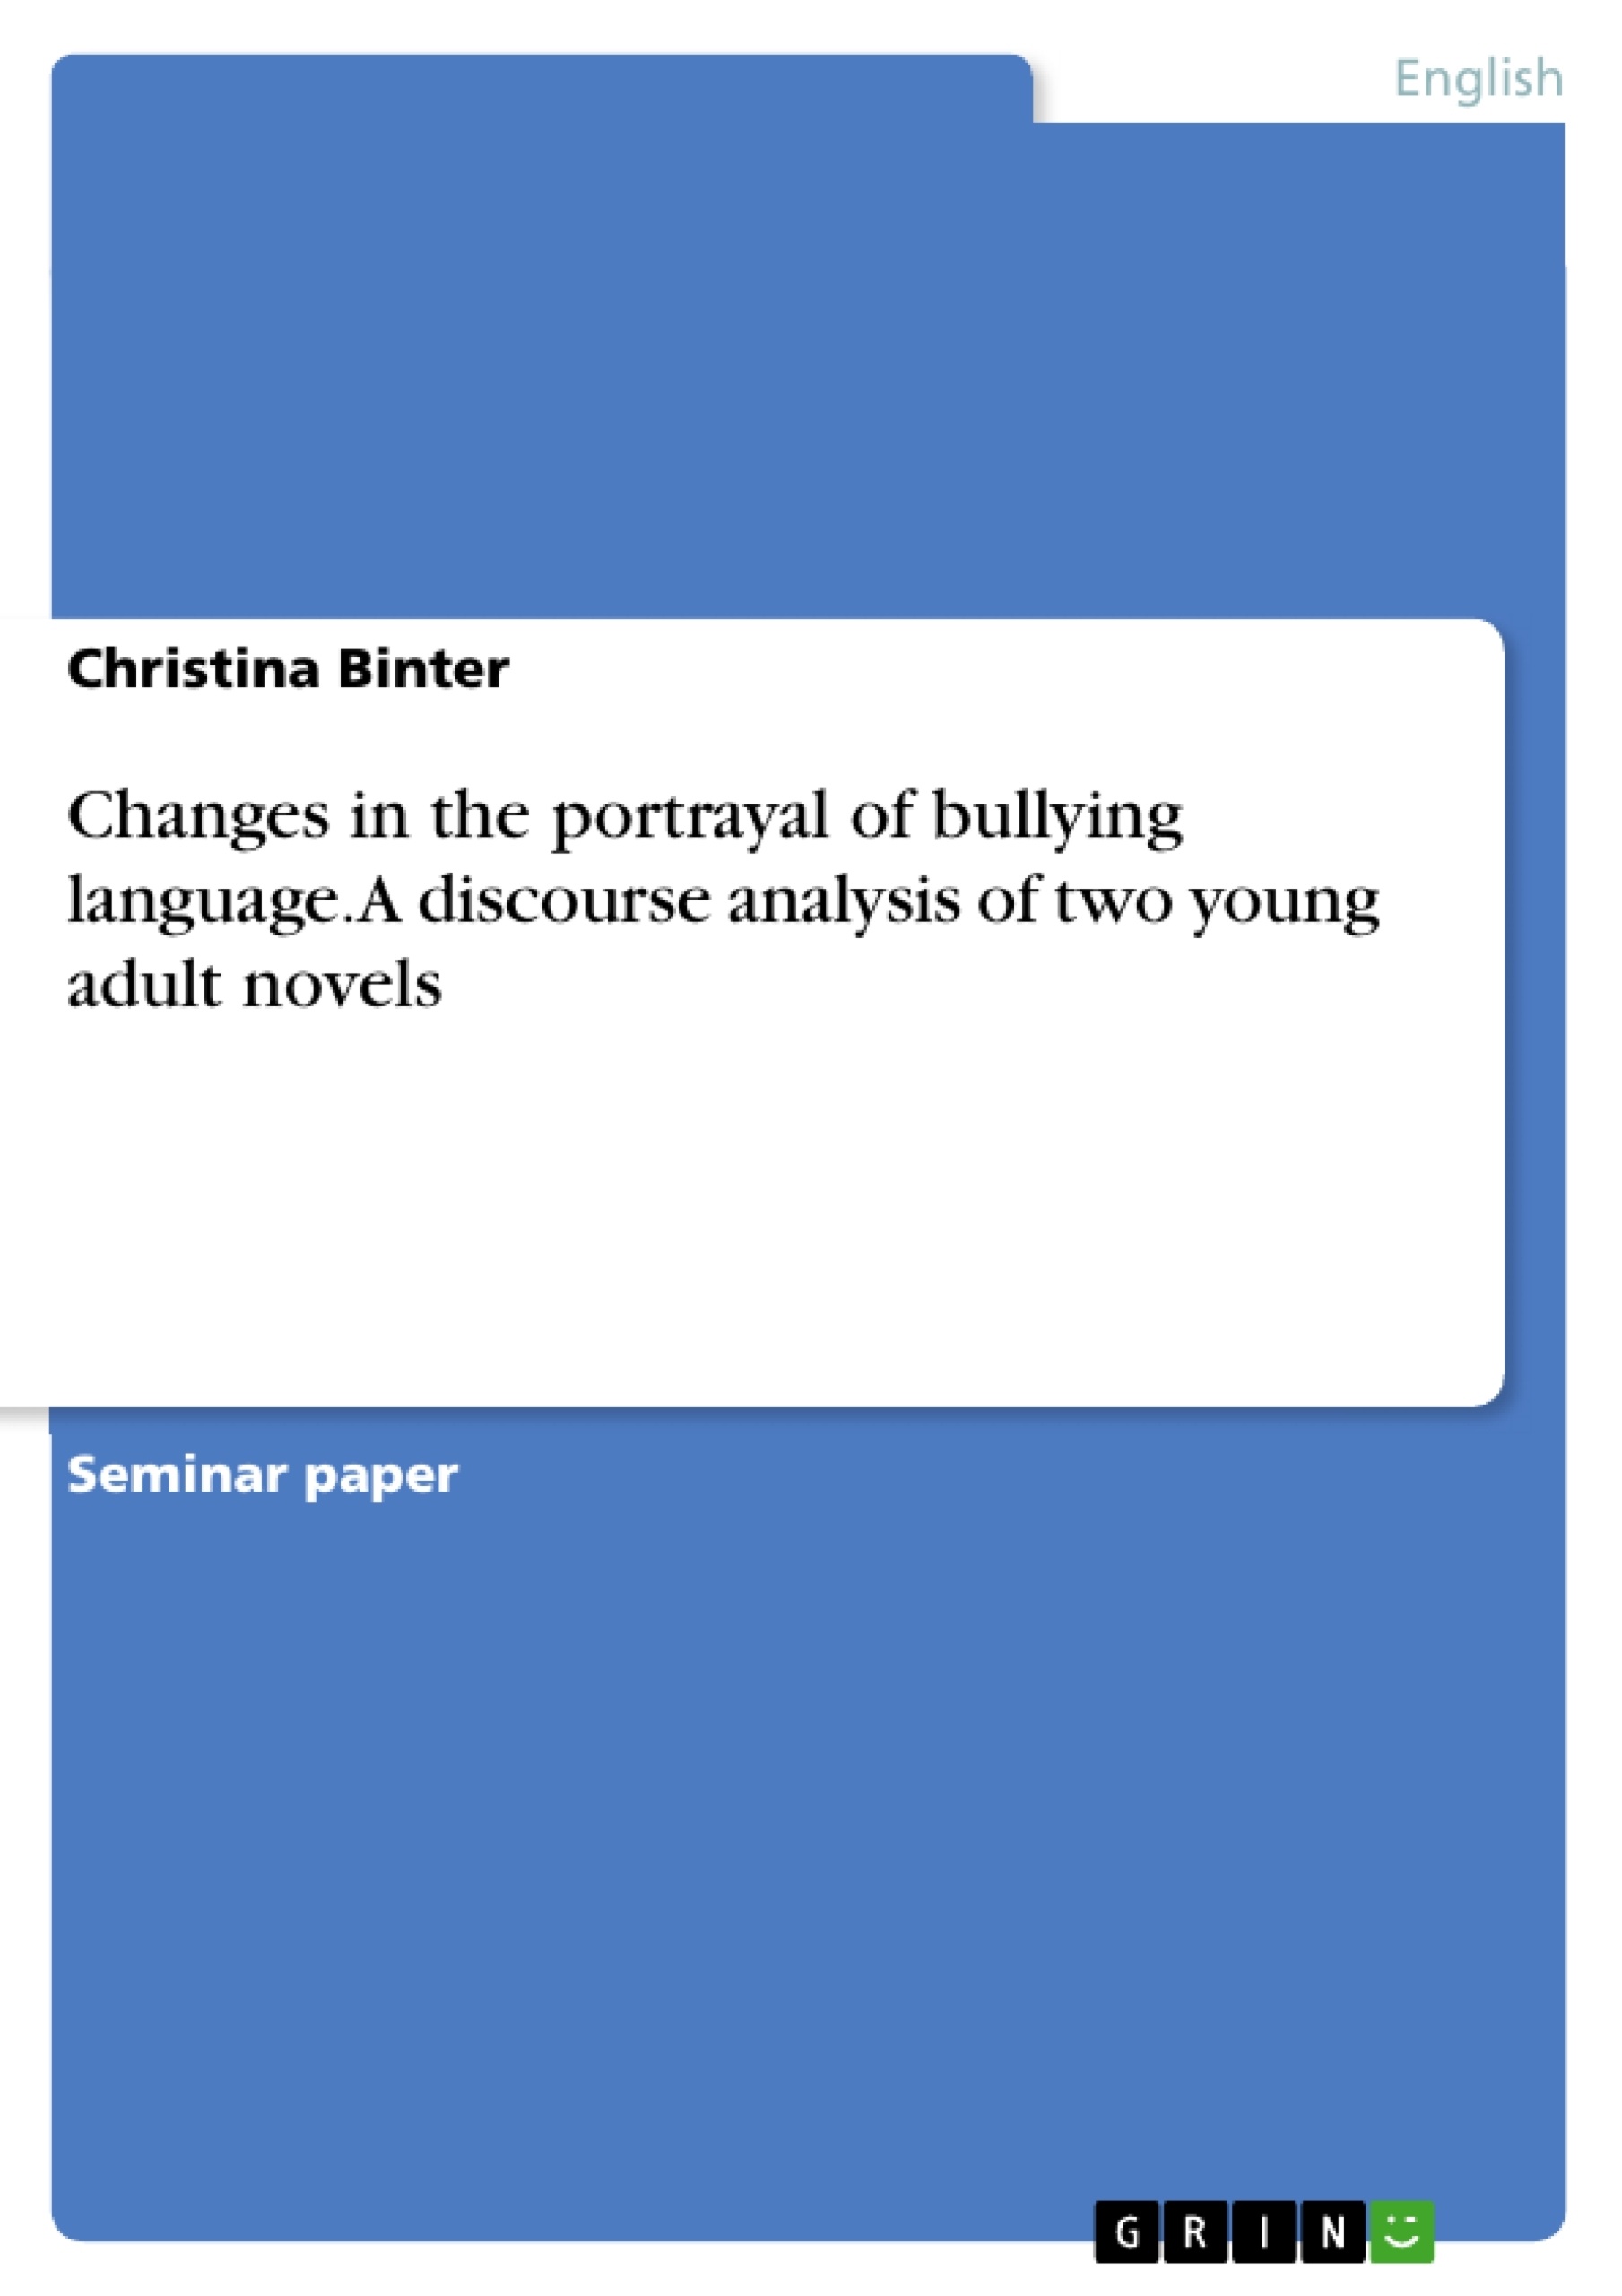 Title: Changes in the portrayal of bullying language. A discourse analysis of two young adult novels